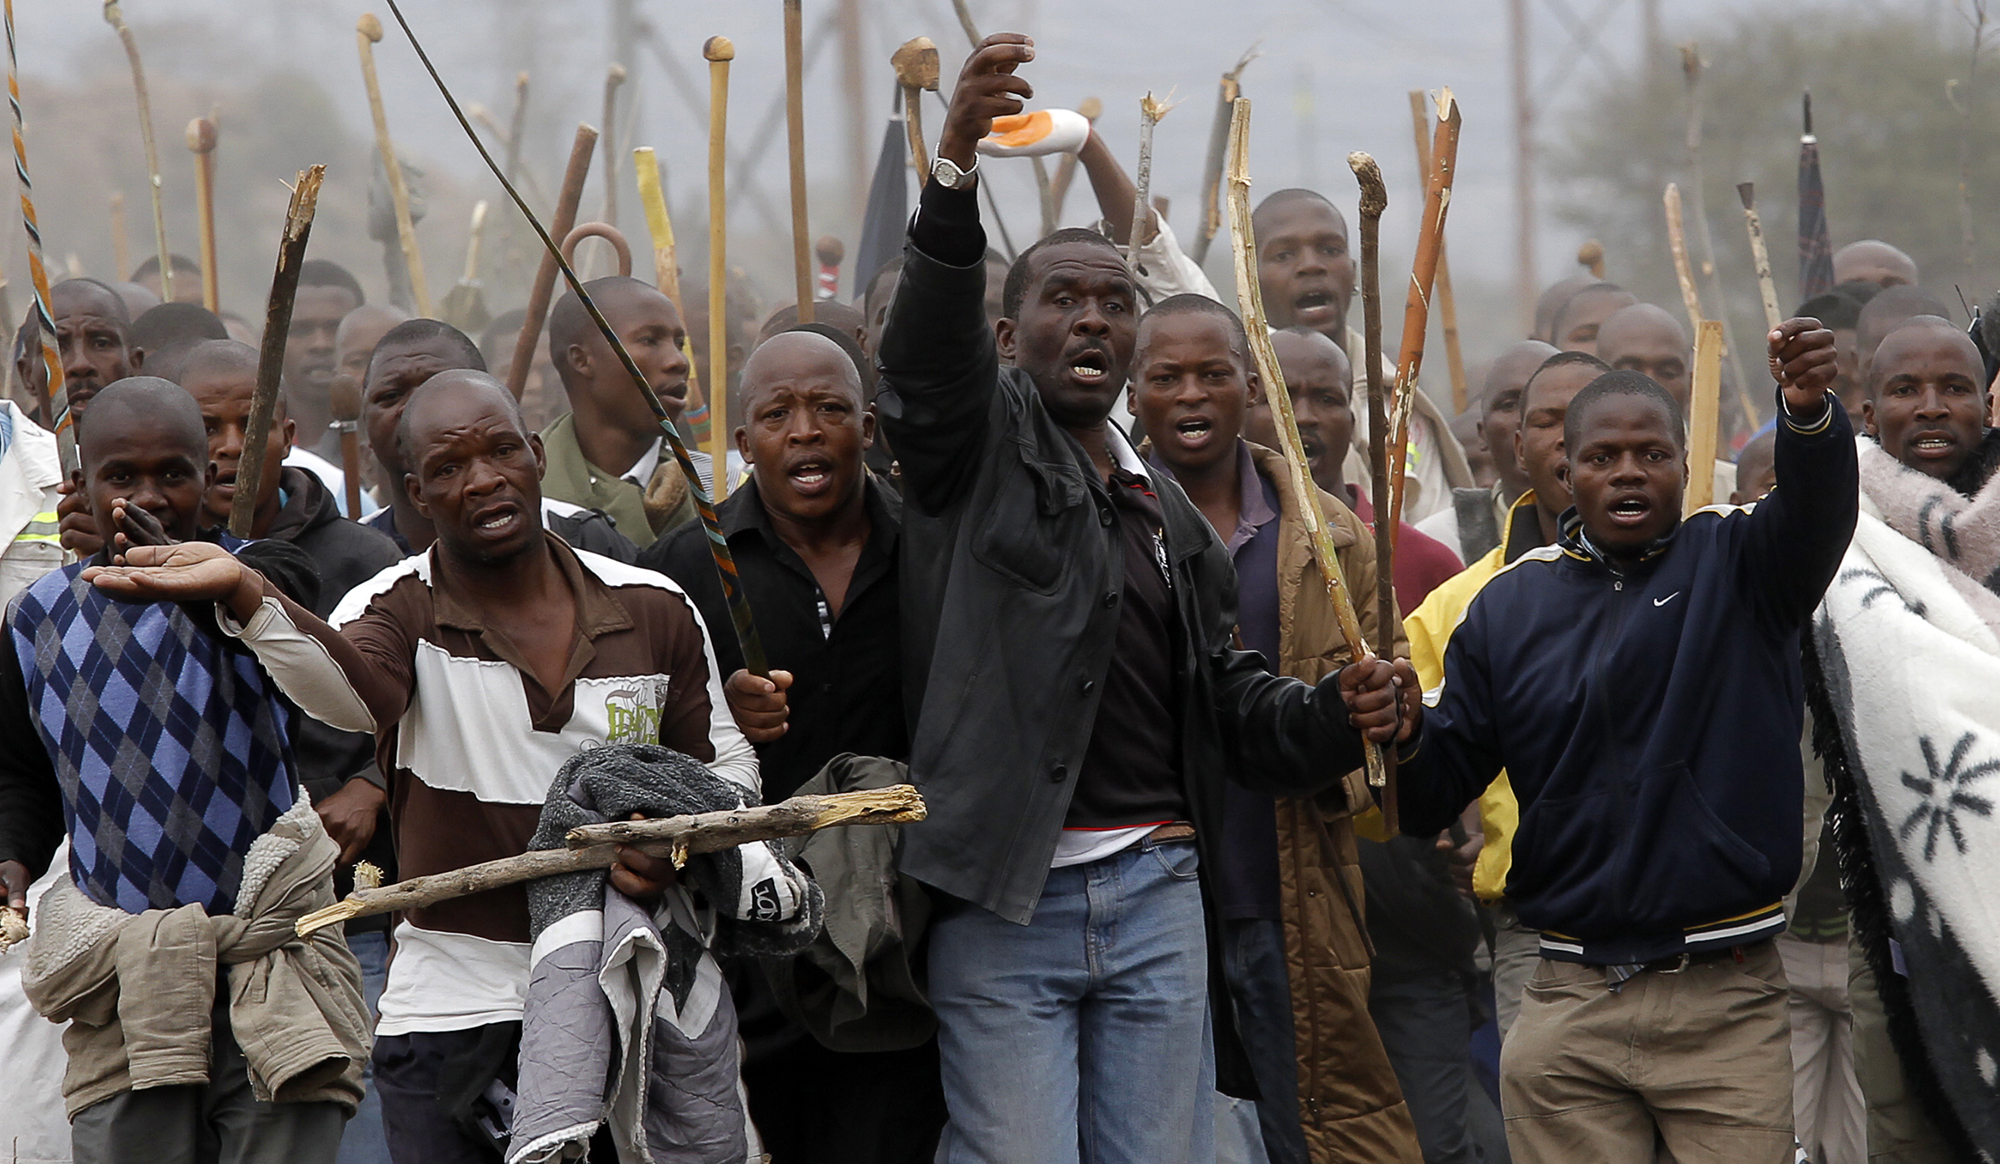 Some of the thousands of striking miners from the Lonmin platinum mine at Marikana